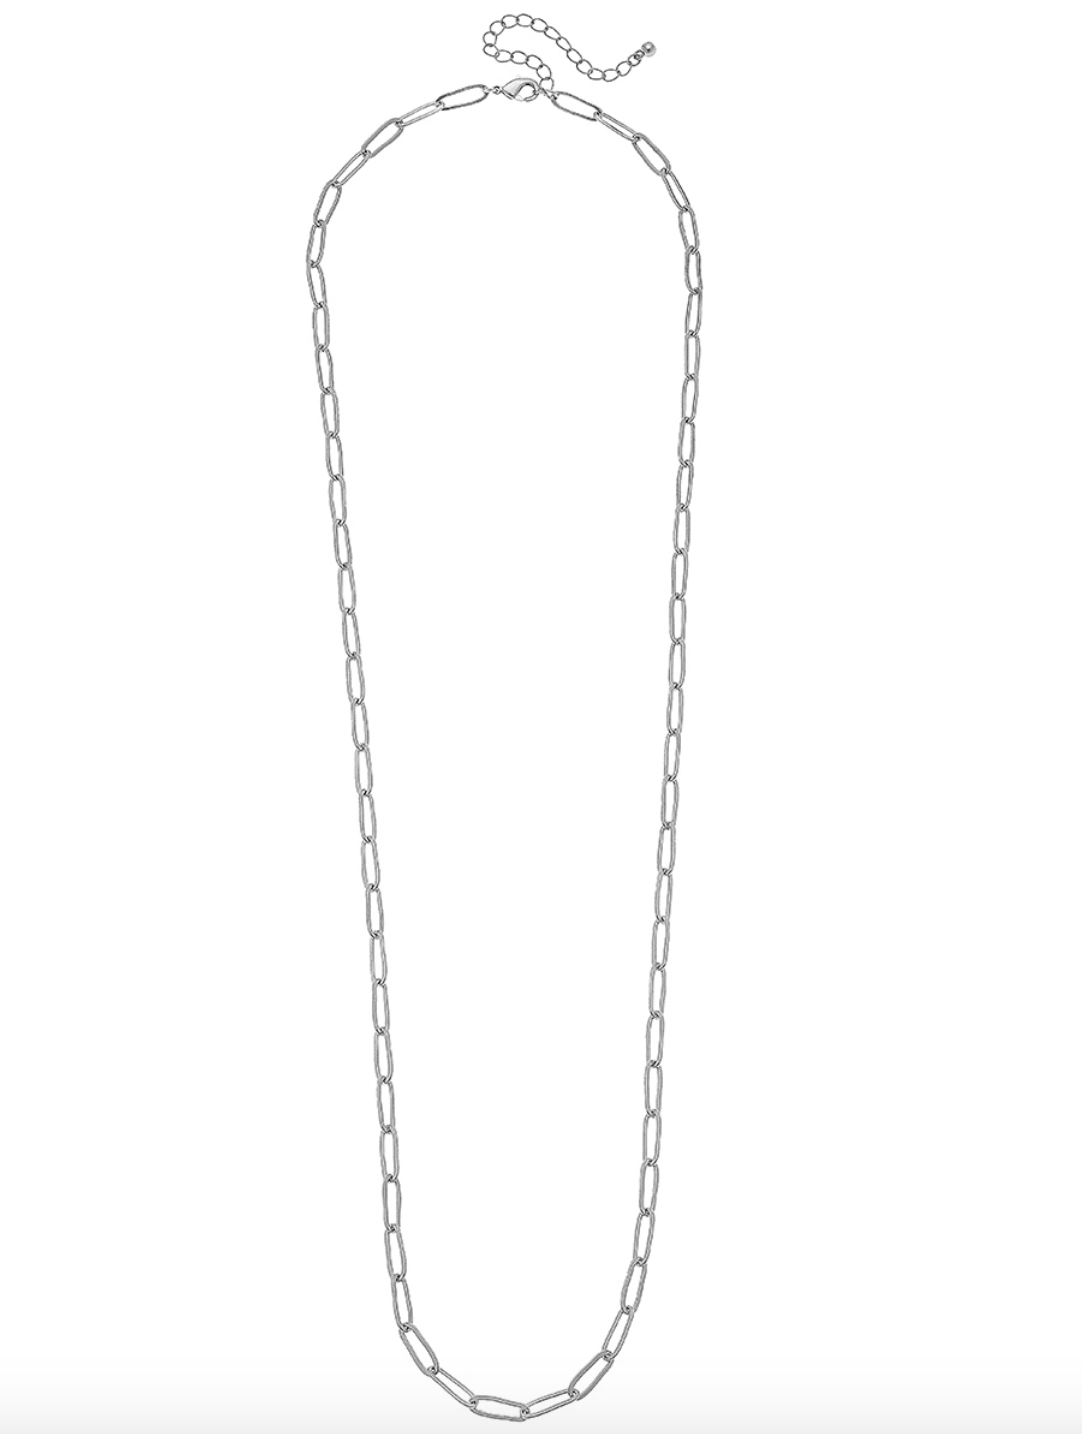 Elodie Paperclip Chain 30" Necklace